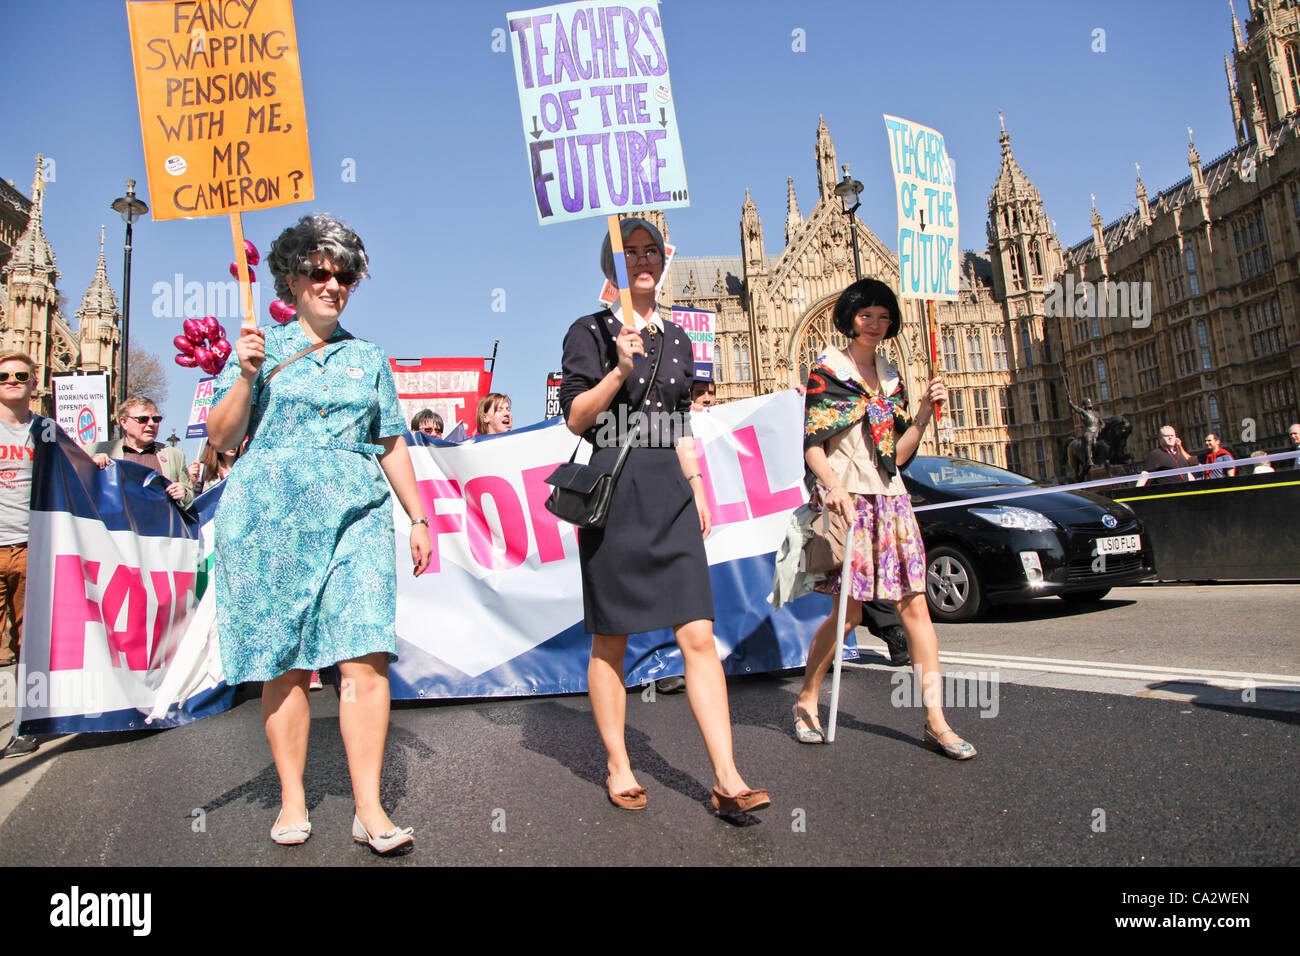 LONDON, UK, 28th Mar, 2012. Protesters dressed as elderly ladies hold placards saying 'teachers of the future' as the march passes Parliament. Thousand of teachers and lecturers gathered in Malet Street before marching to Westminster to protest against the government’s plans for public sector pensio Stock Photo